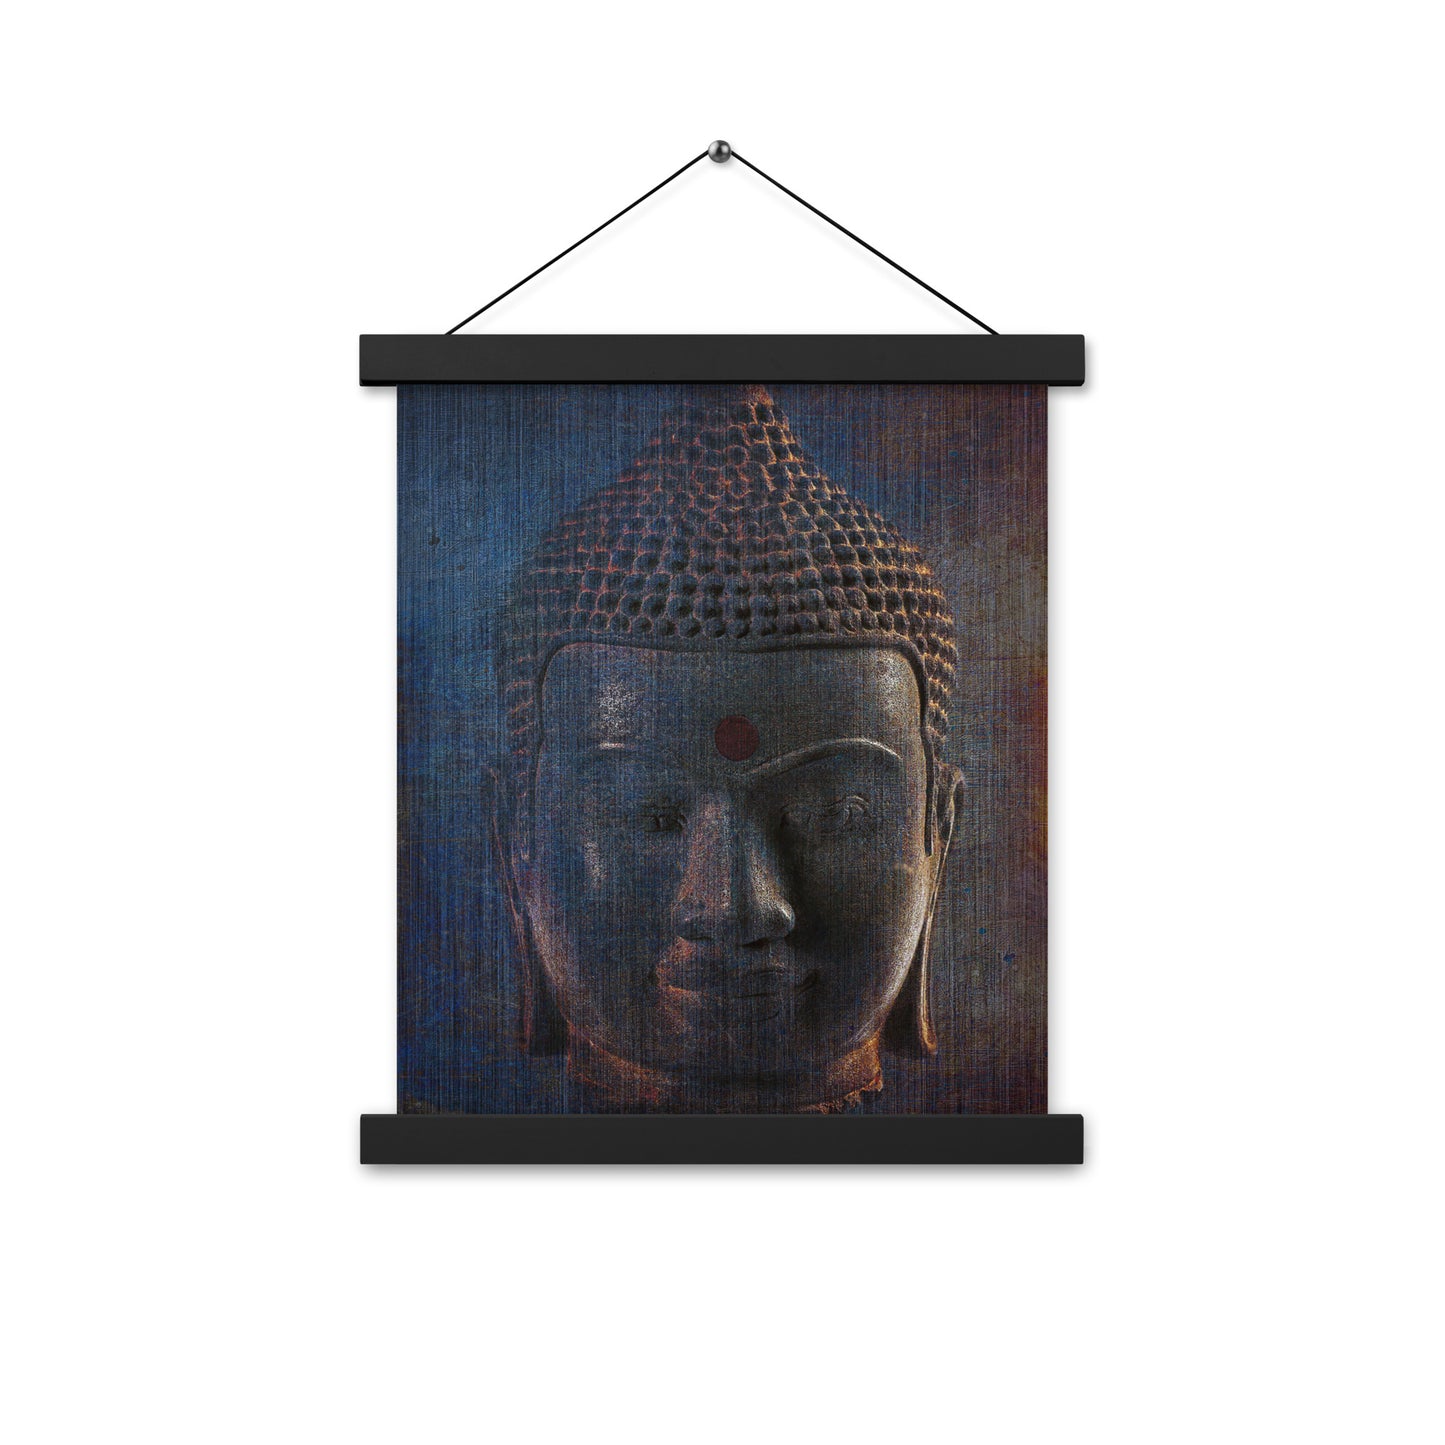 Spiritual and Meditation Wall Artwork Modern Art Blue Buddha Head Printed on Archival Paper with Magnetic Wood Hangers 11x14